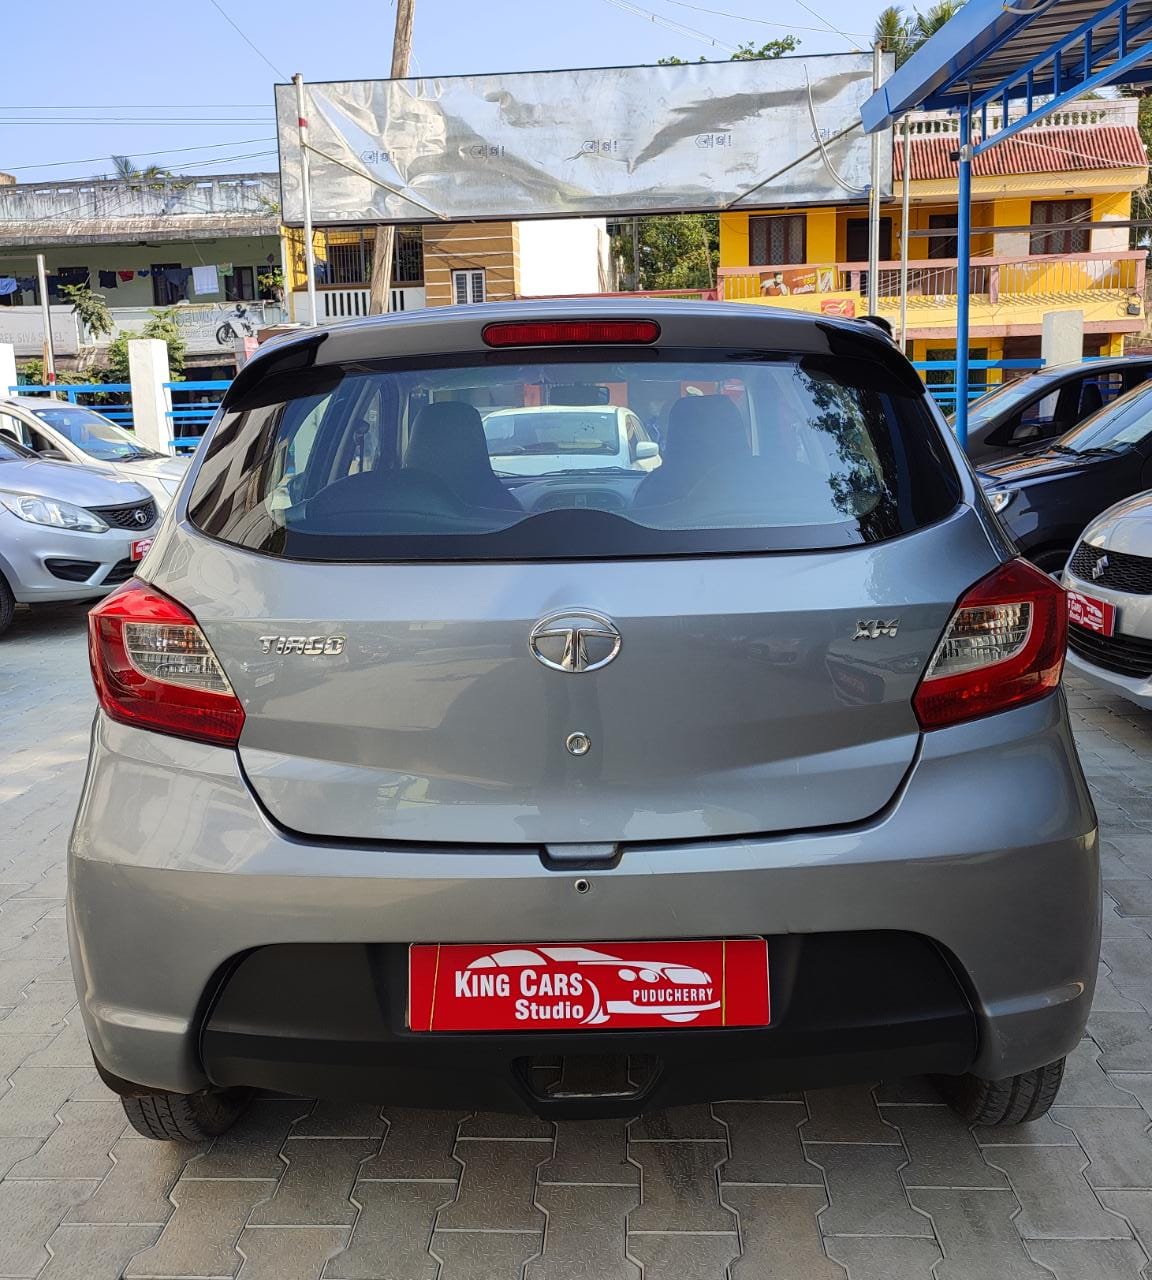 6451-for-sale-Tata-Motors-Tiago-Petrol-First-Owner-2018-PY-registered-rs-394999